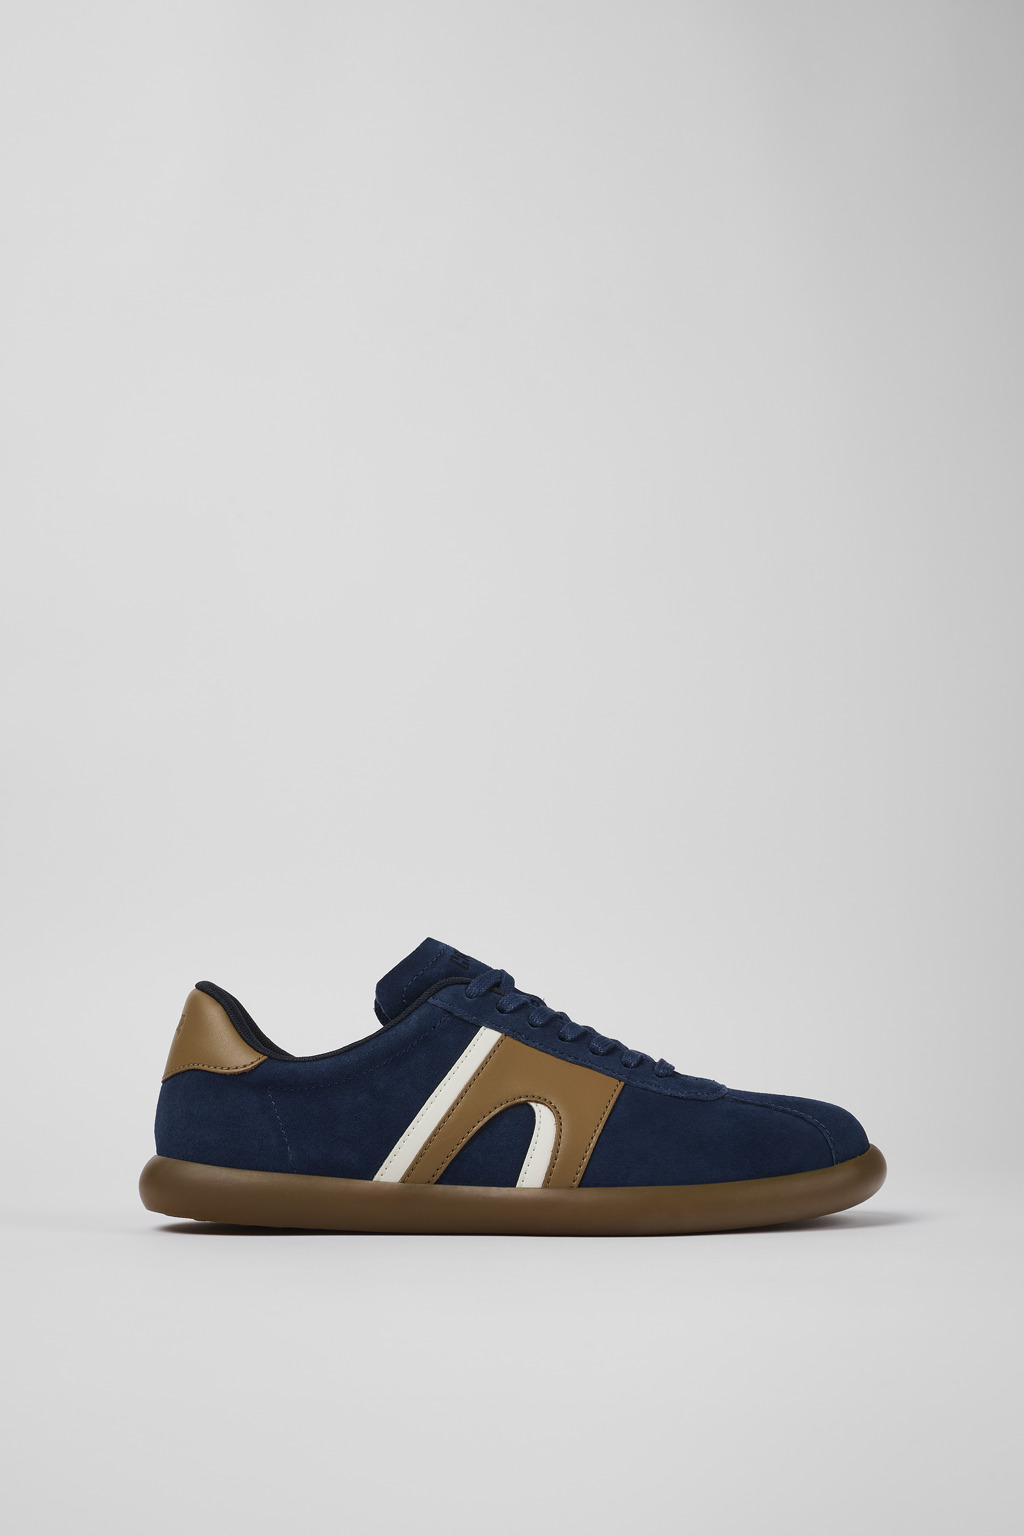 Pelotas Blue Sneakers for Men - Fall/Winter collection - Camper 